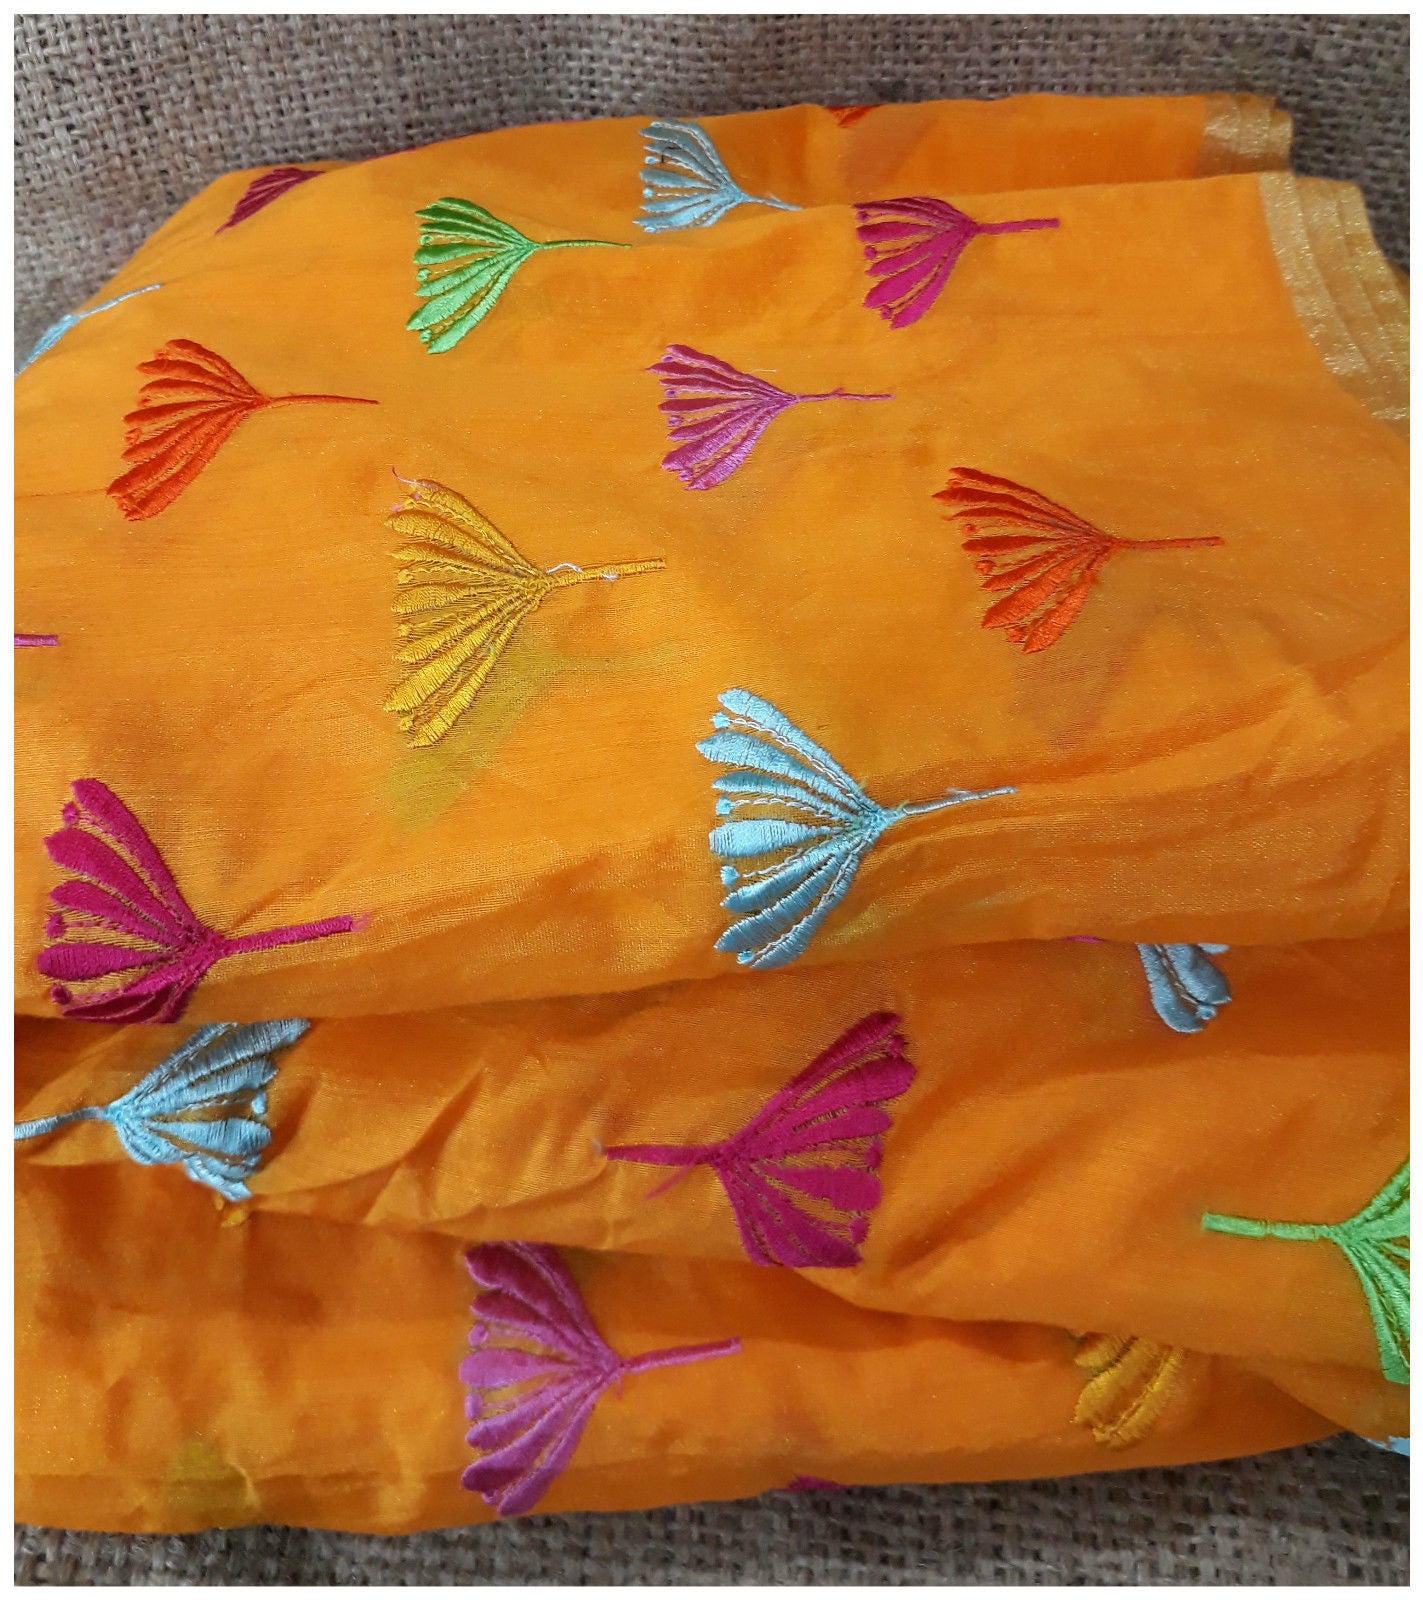 running material clothing online online fabric store india Embroidery Chanderi Cotton Orange 43 inches Wide ange